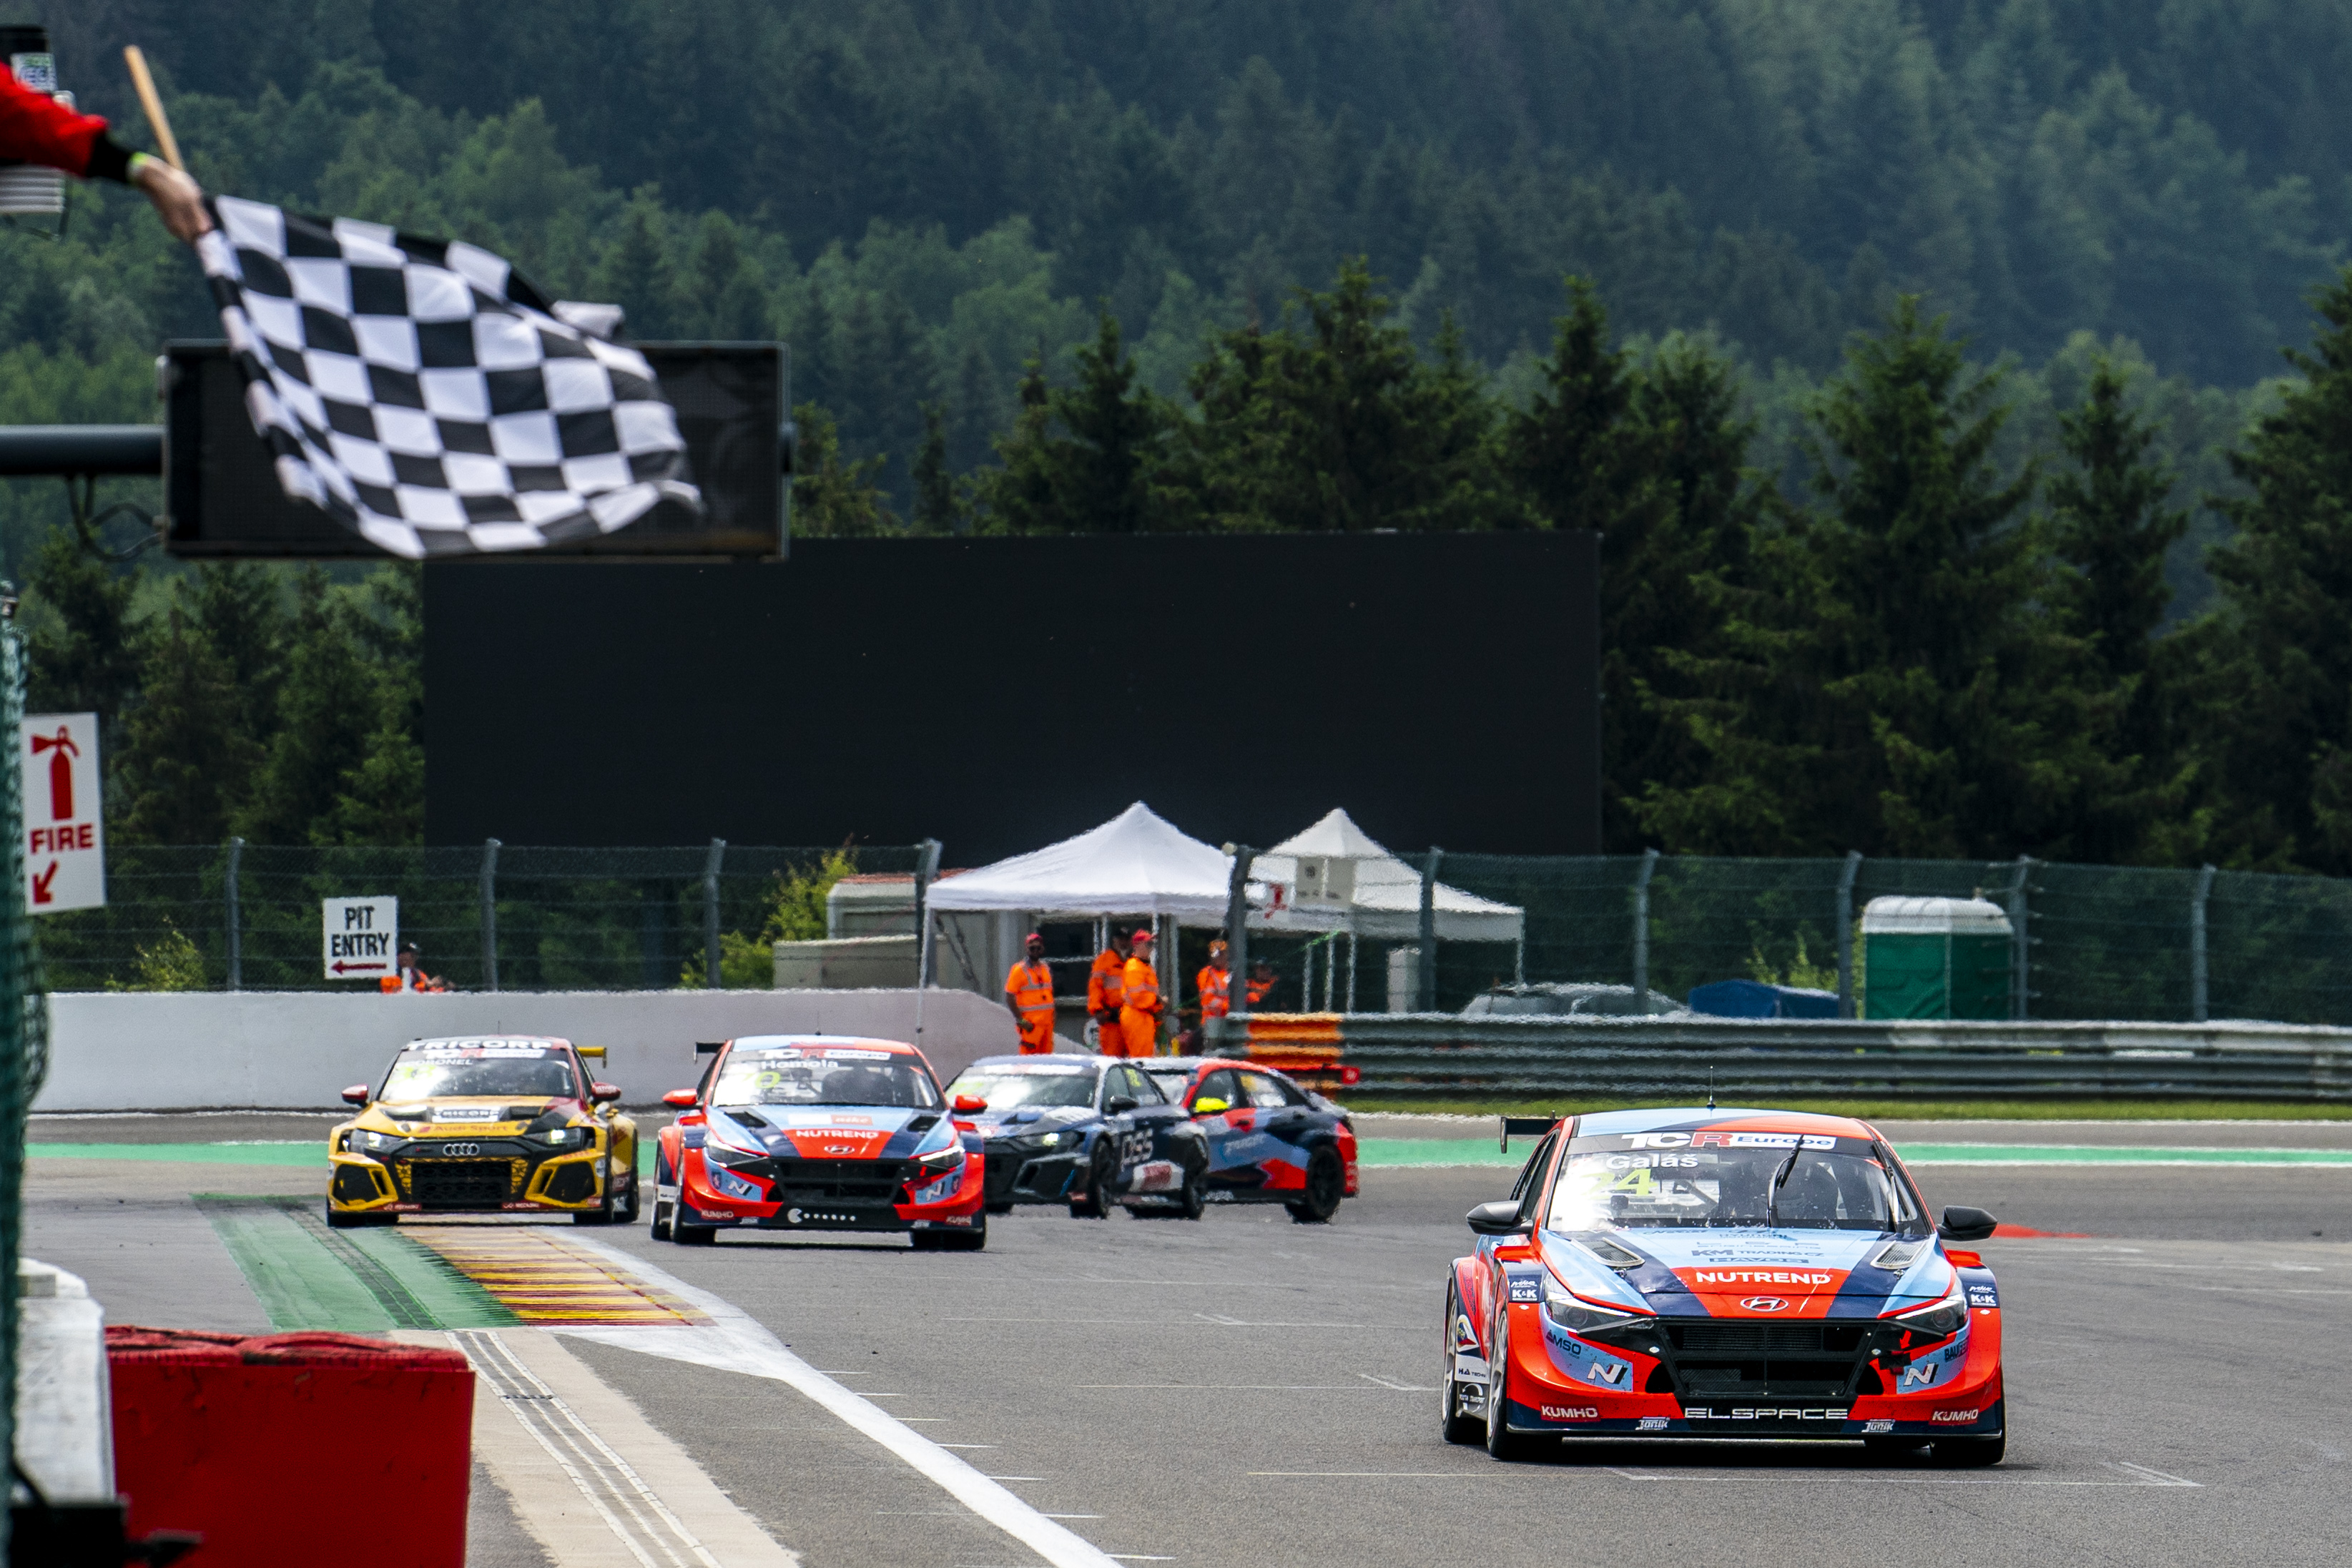 Jáchym Galáš, offspring of TCR Eastern Europe, won in Spa-Francorchamps